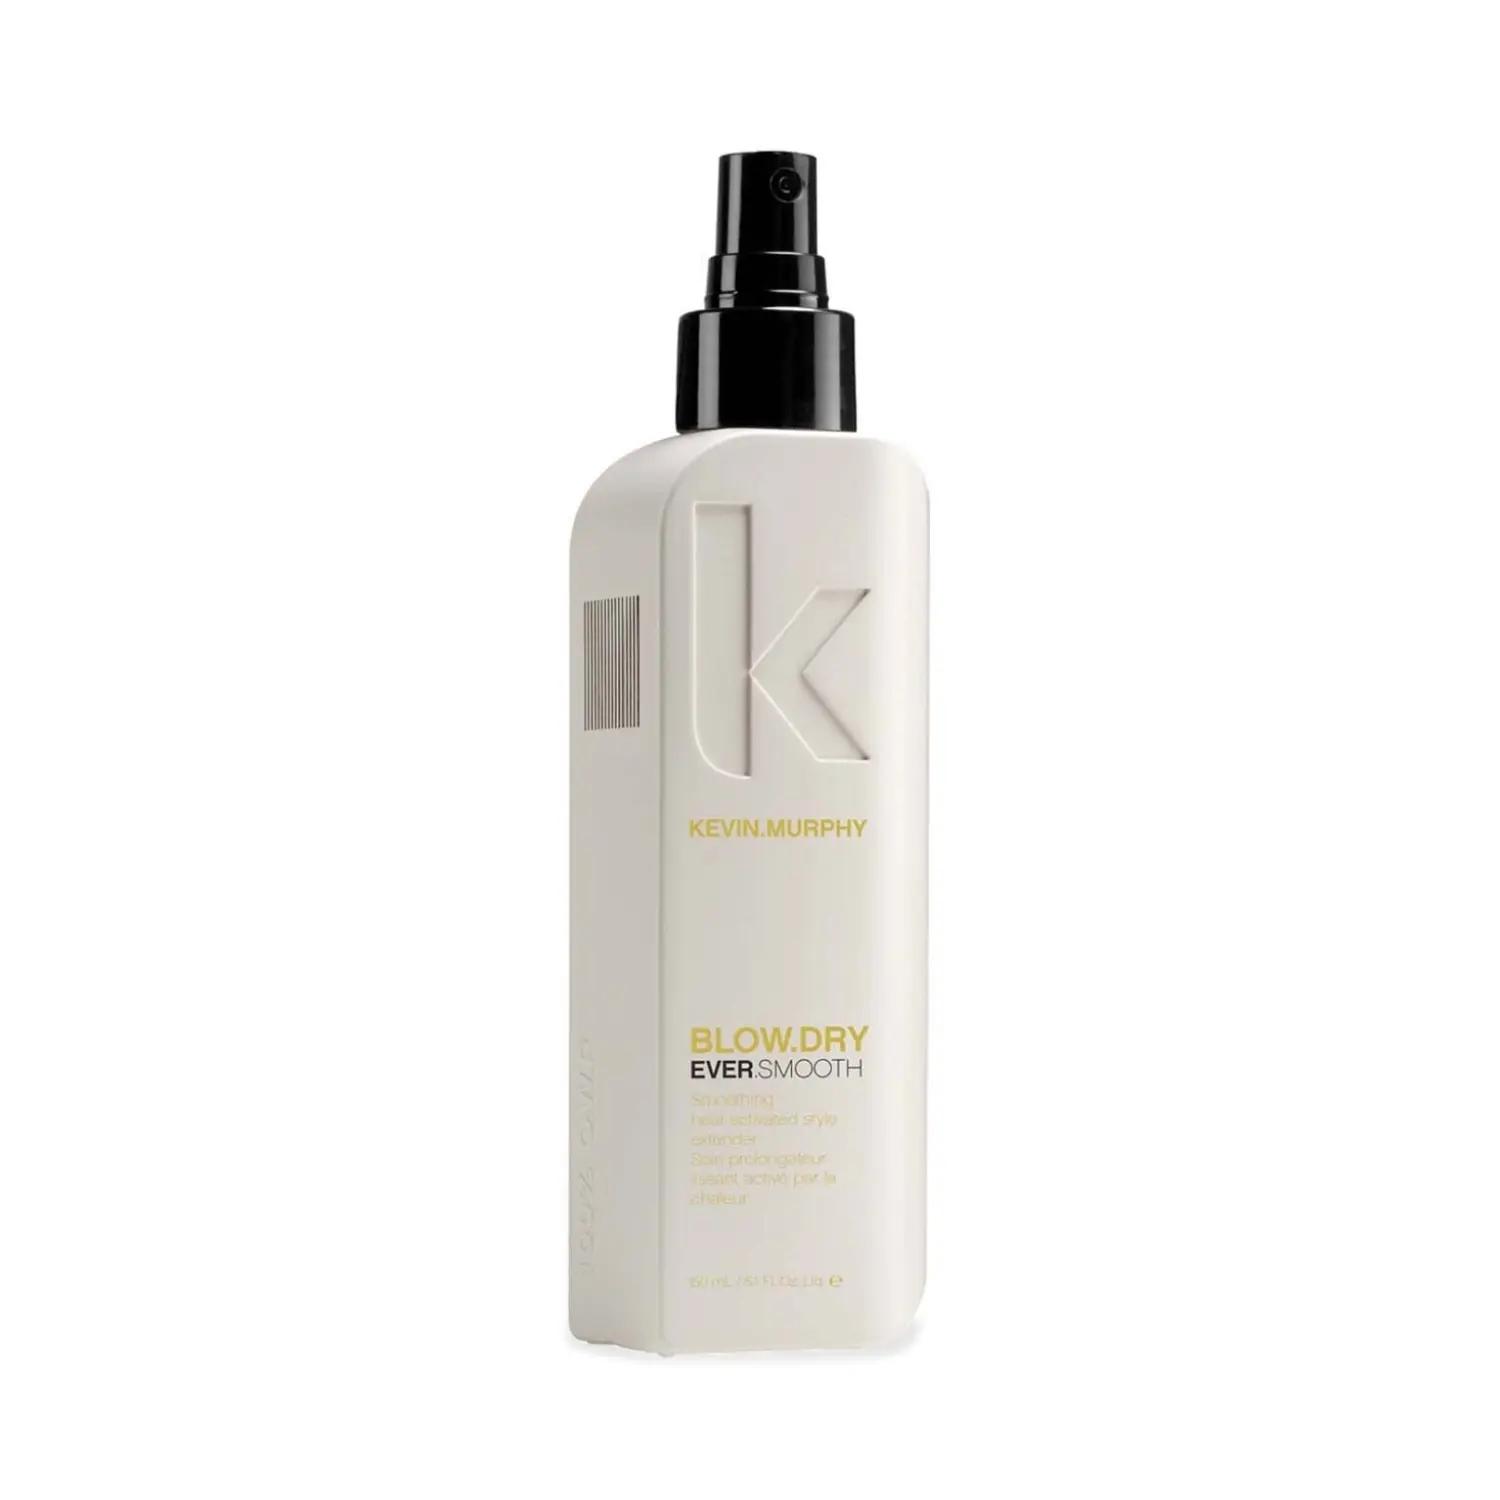 kevin-murphy-blow-dry-ever-smooth-heat-activated-style-extender-(150ml)